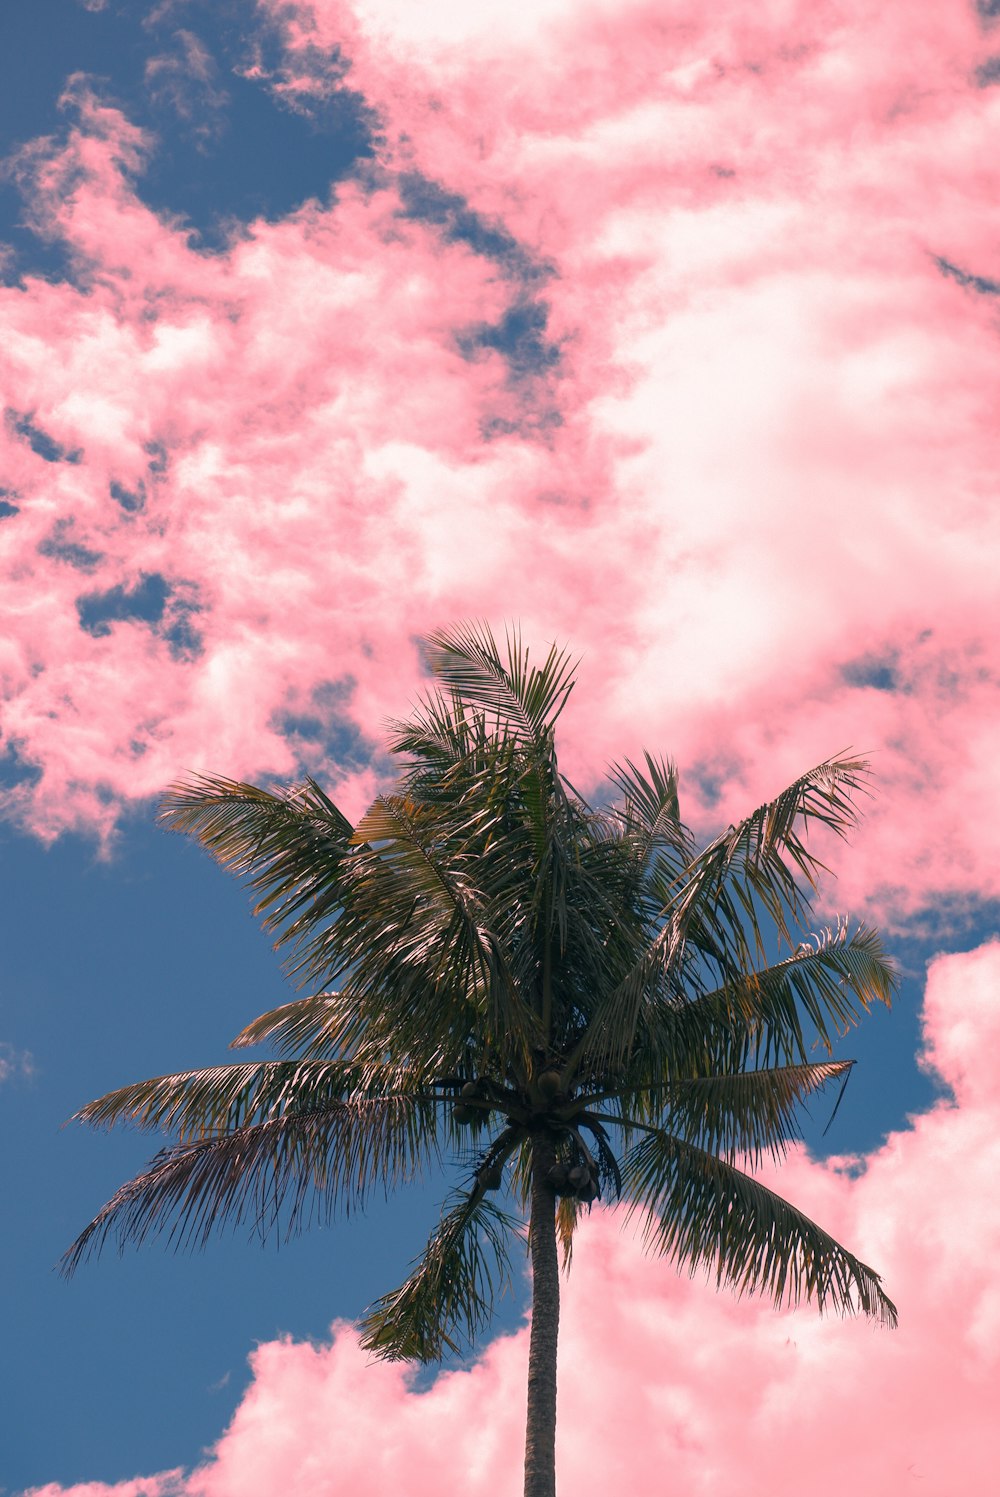 a palm tree with pink clouds in the background